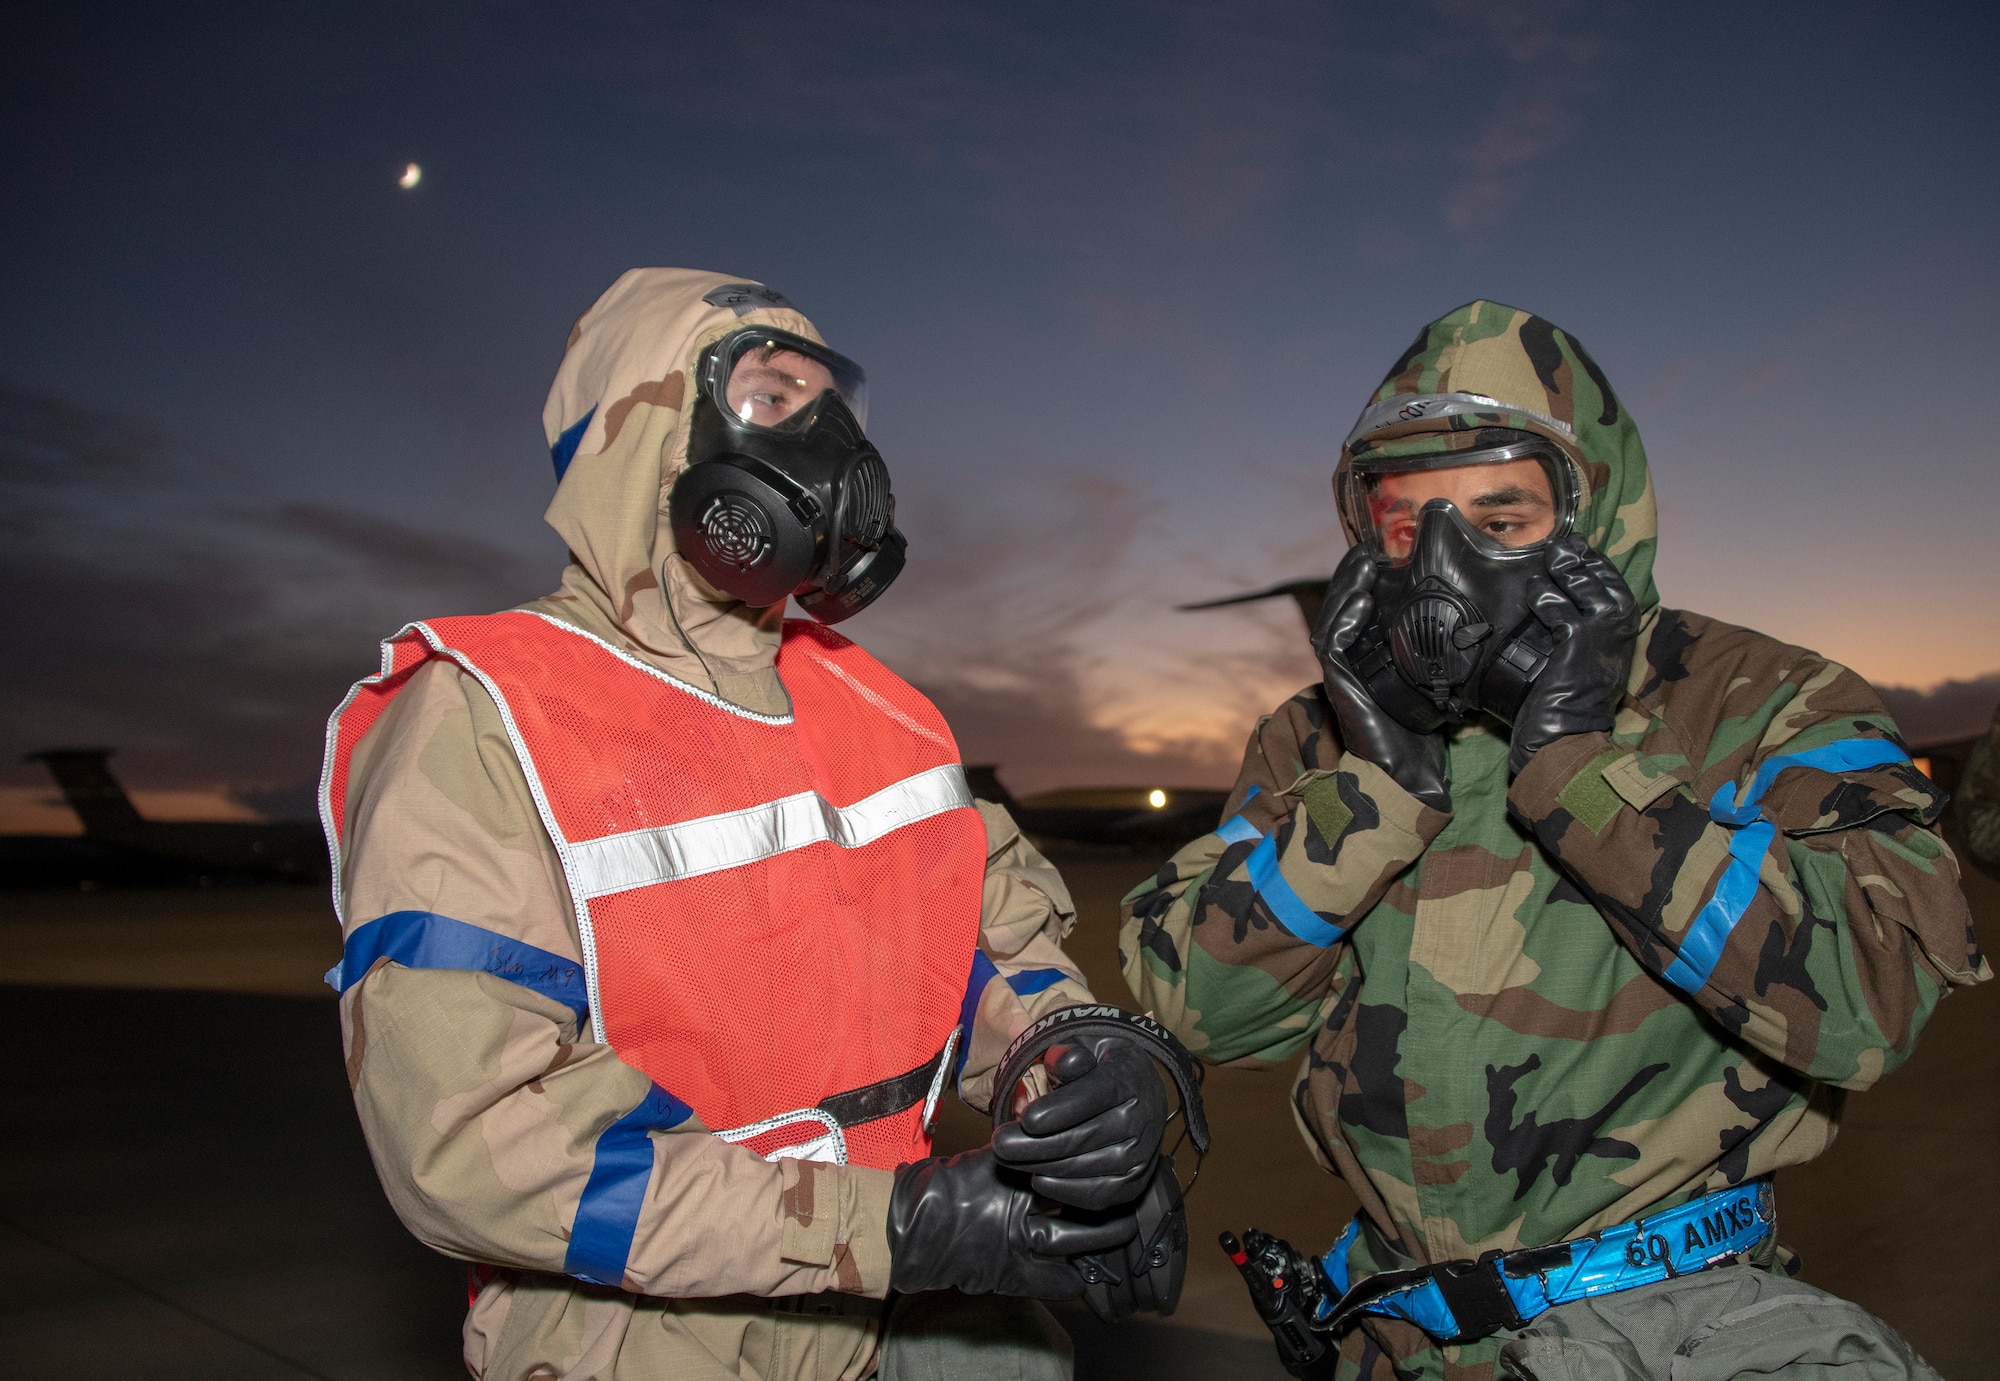 U.S. Air Force Airman 1st Class Ryan Massey, right, and Airman 1st Class Evan Conrad, both 60th Aircraft Maintenance Squadron C-5 crew chiefs, check their mission oriented protective posture gear while participating in an exercise Nov. 18, 2020, at Travis Air Force Base, California. Airmen at Travis AFB participate in readiness exercises to ensure they can operate in contested environments. (U.S. Air Force photo by Heide Couch)